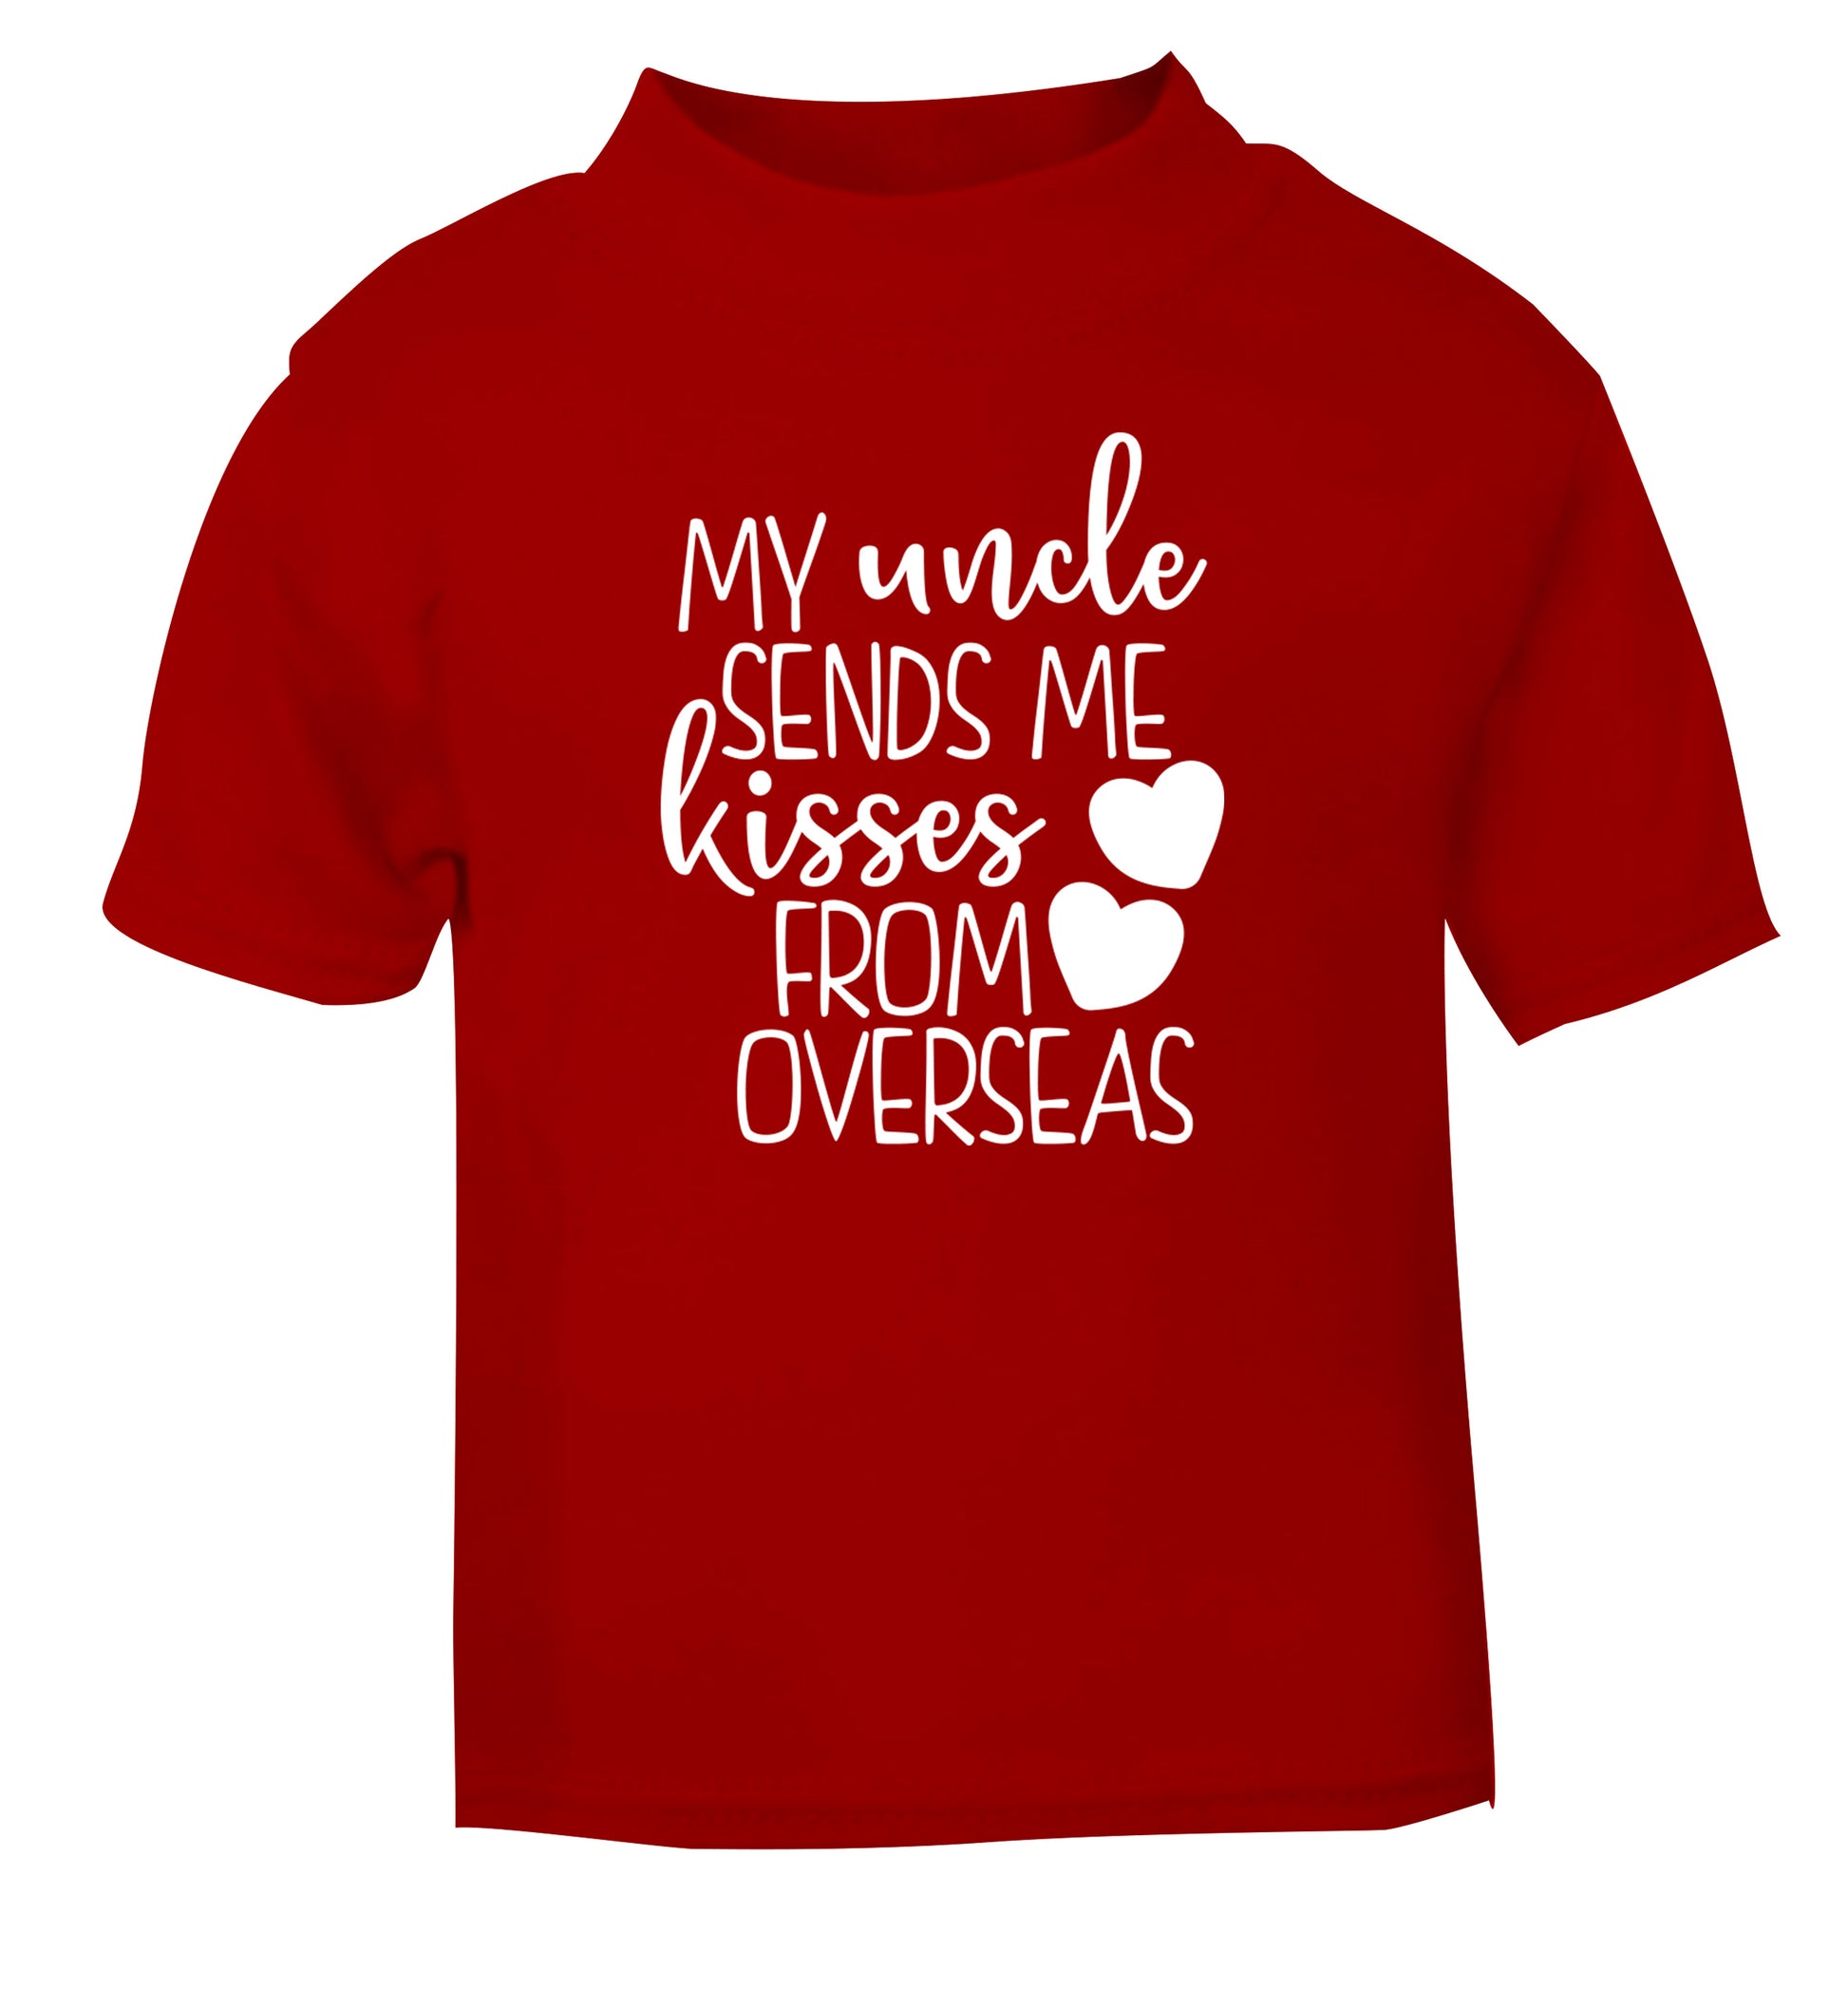 My uncle sends me kisses from overseas red Baby Toddler Tshirt 2 Years